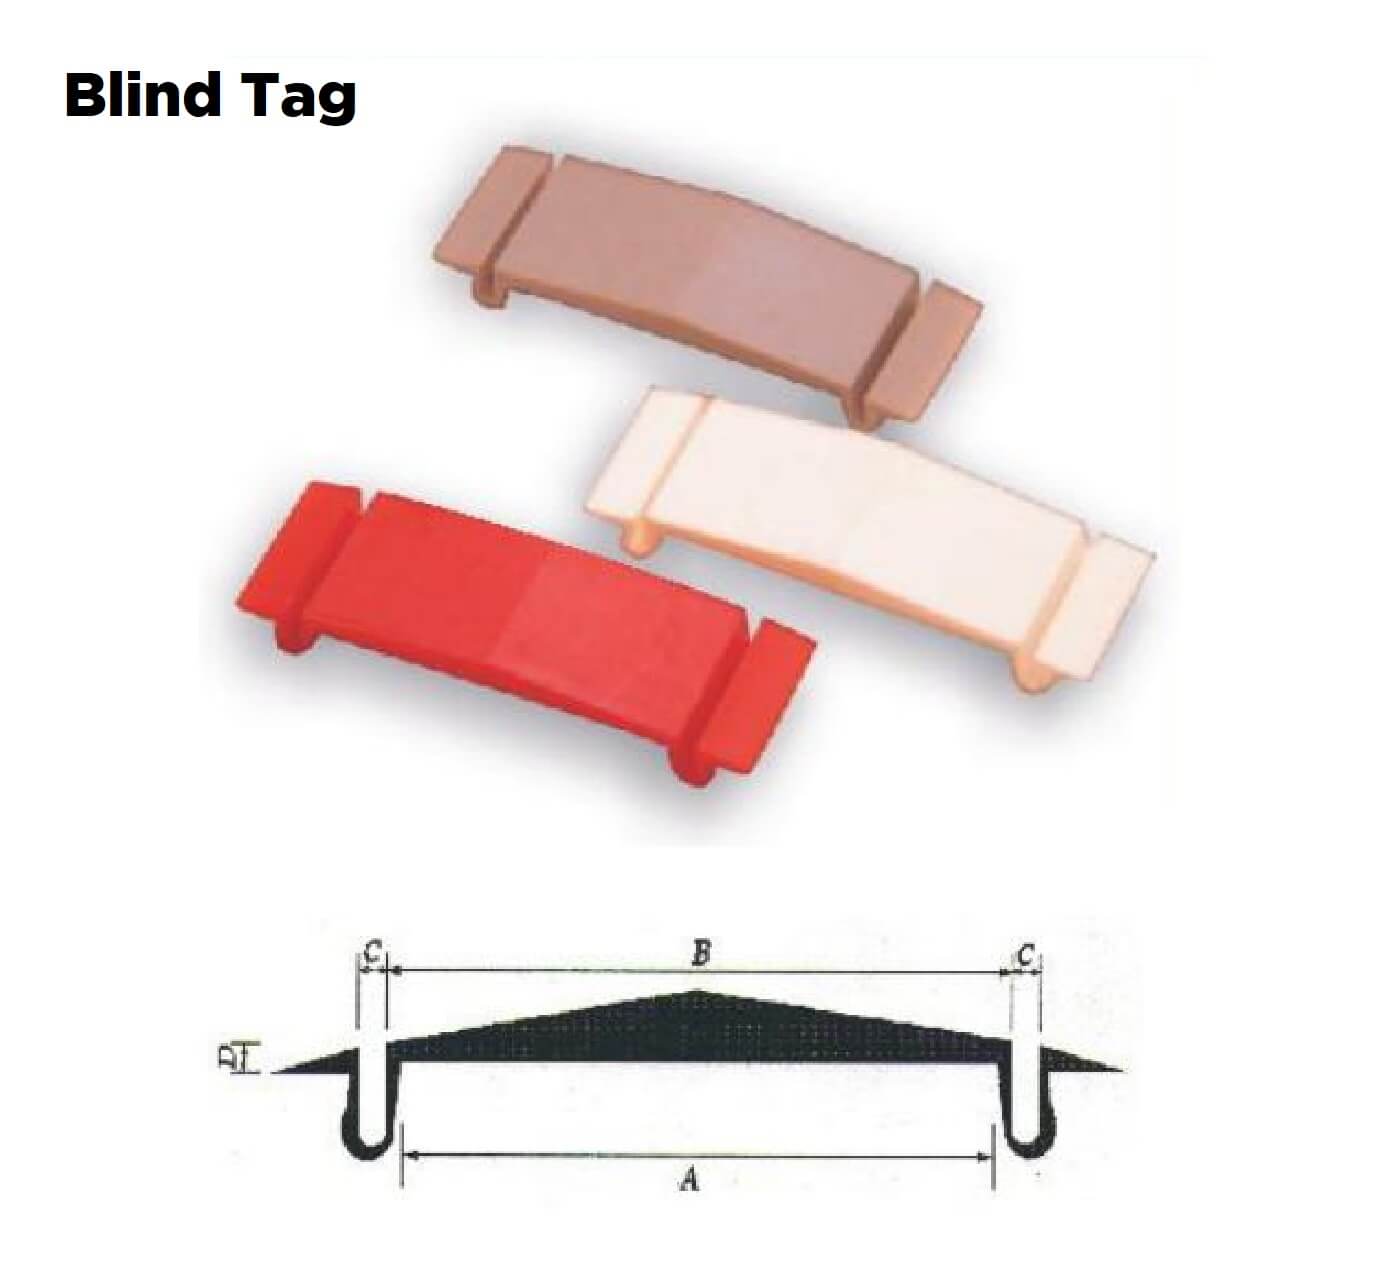 Blind Tag Cross Section